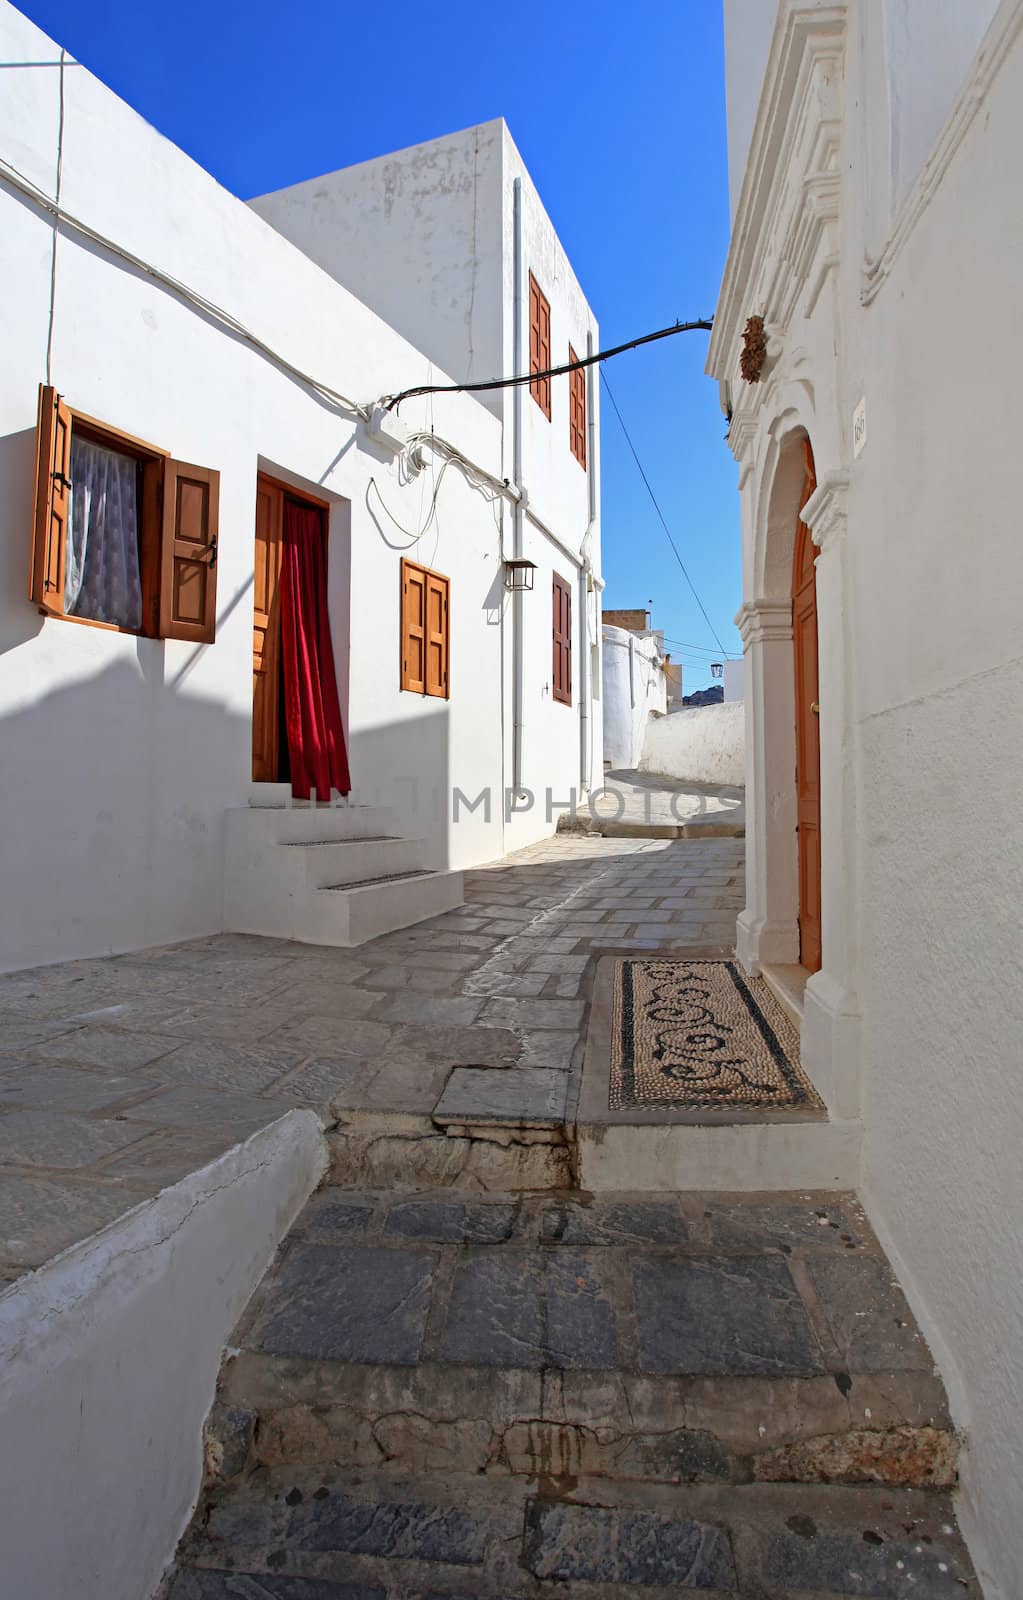 Lindos Streets and Passageways by olliemt